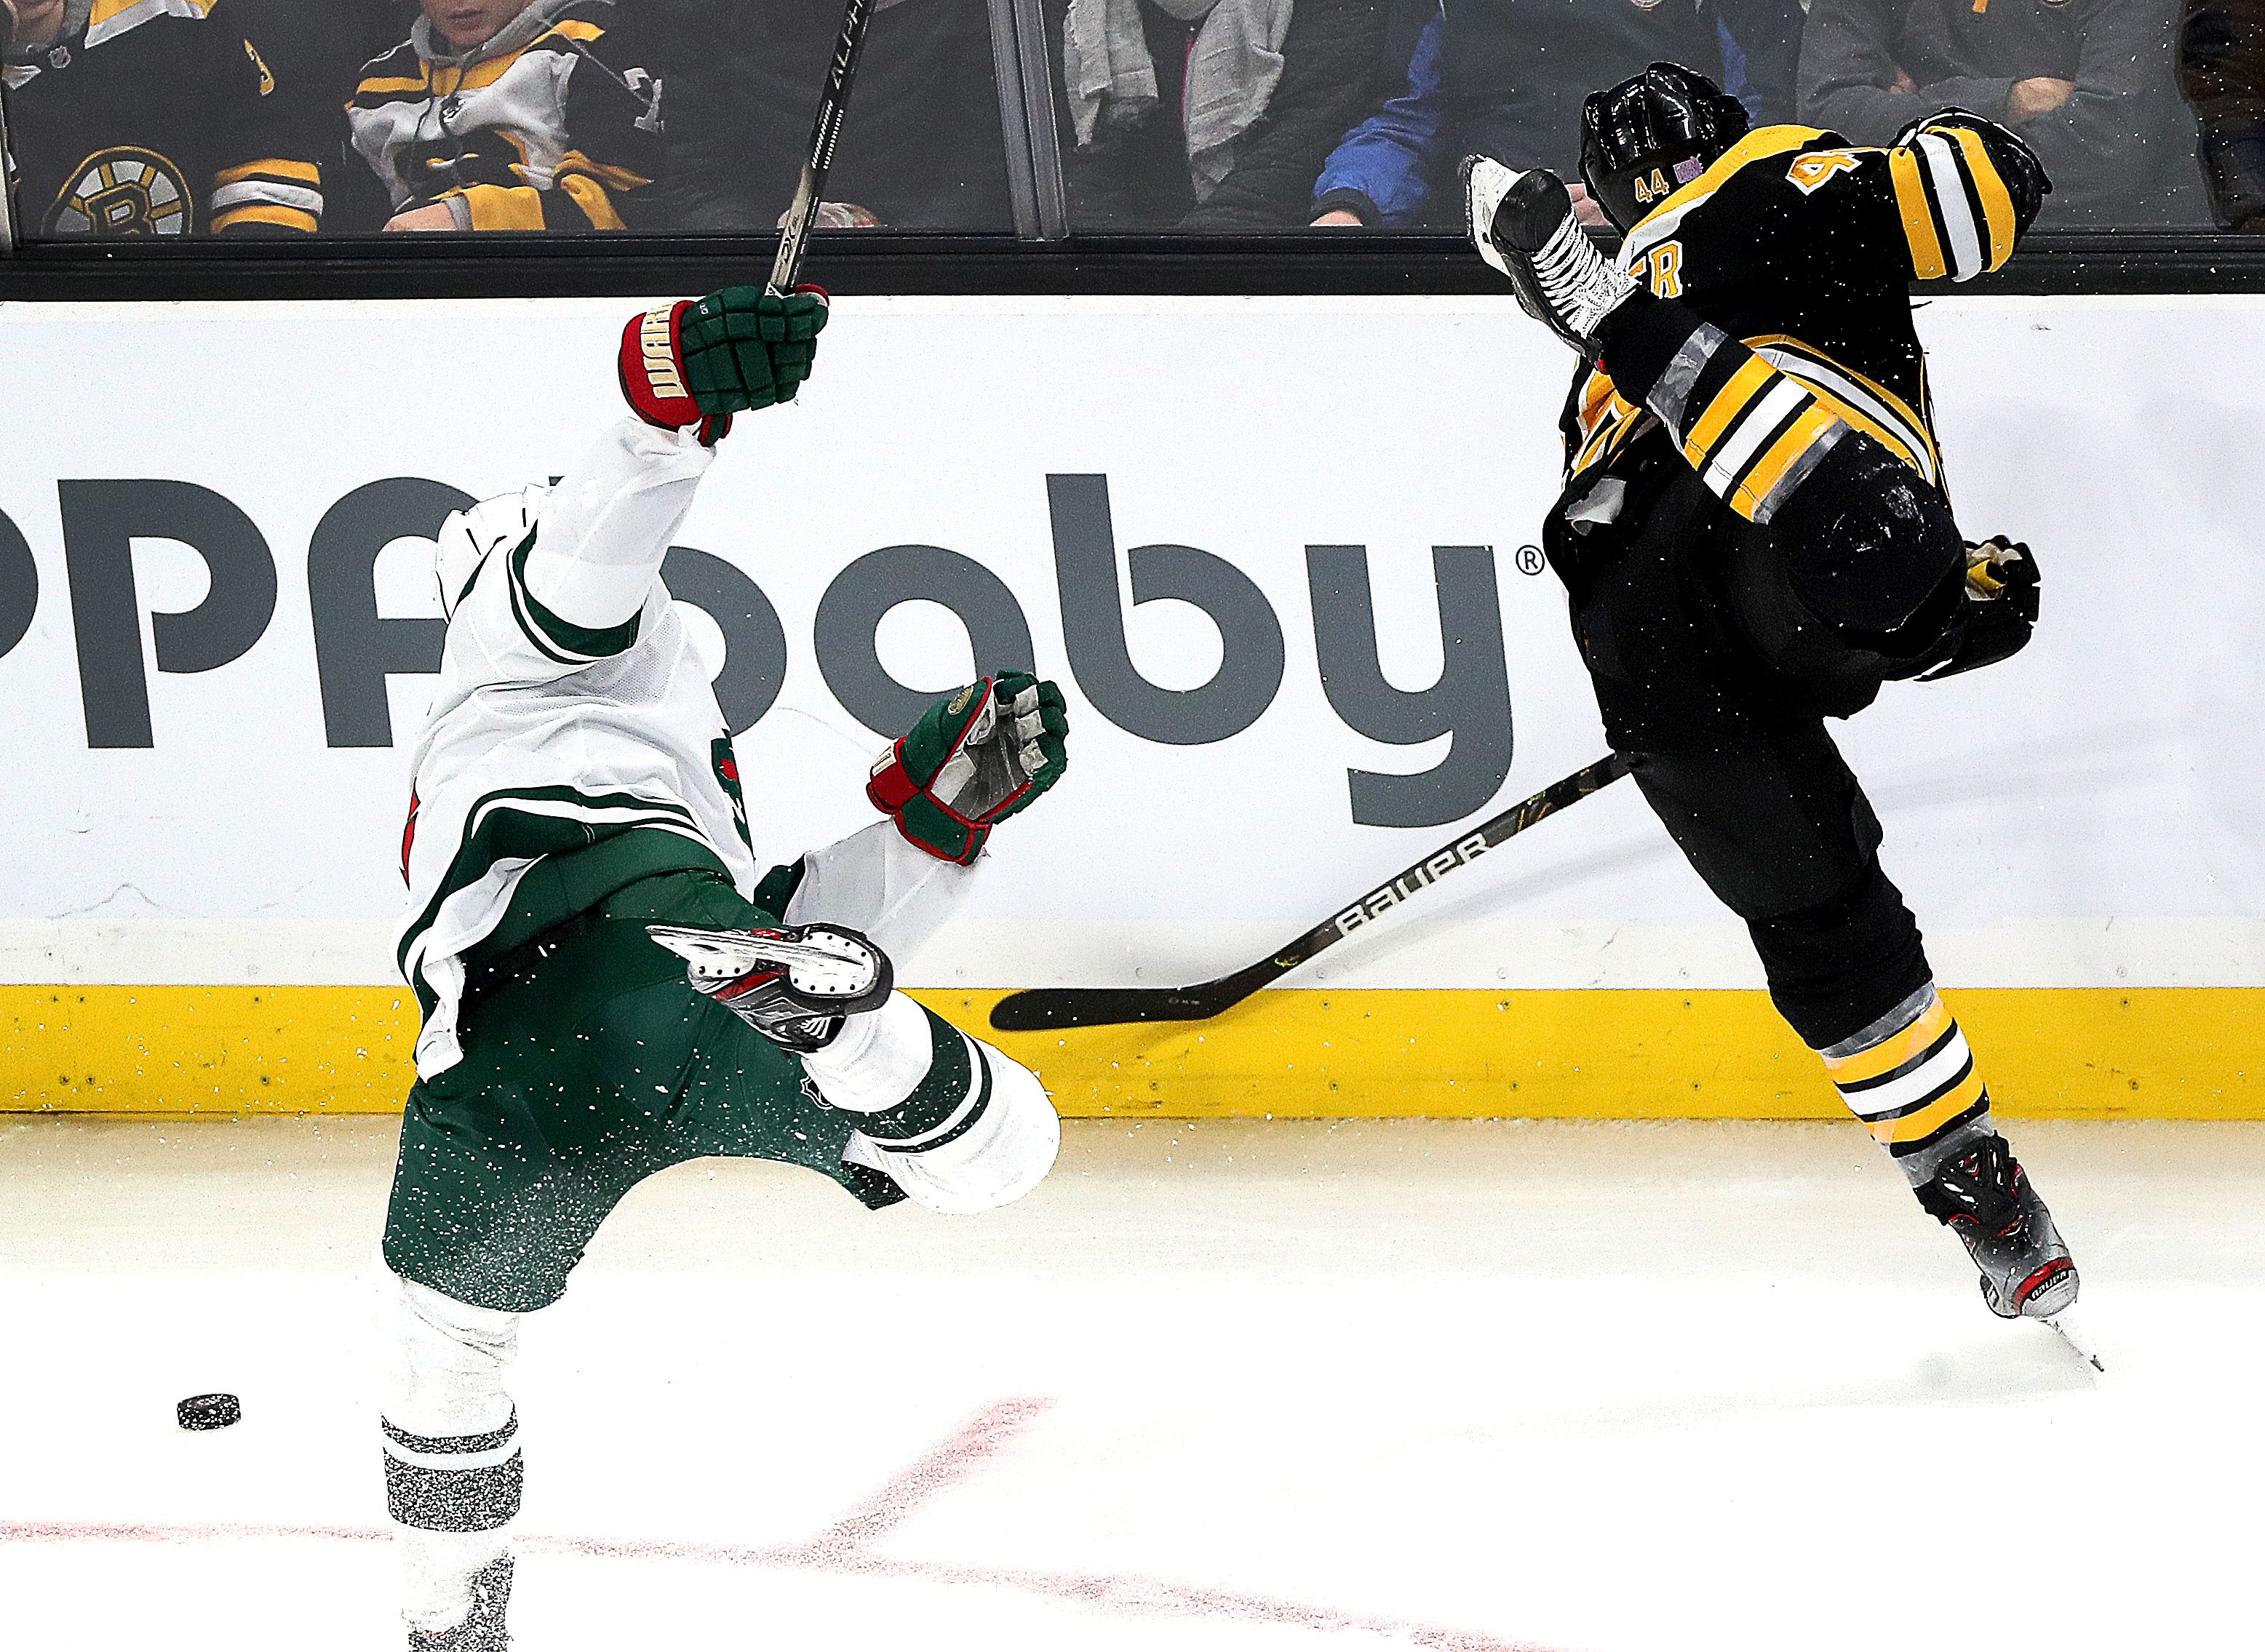 Torey Krug's overtime goal delivers a statement victory for the Bruins -  The Boston Globe